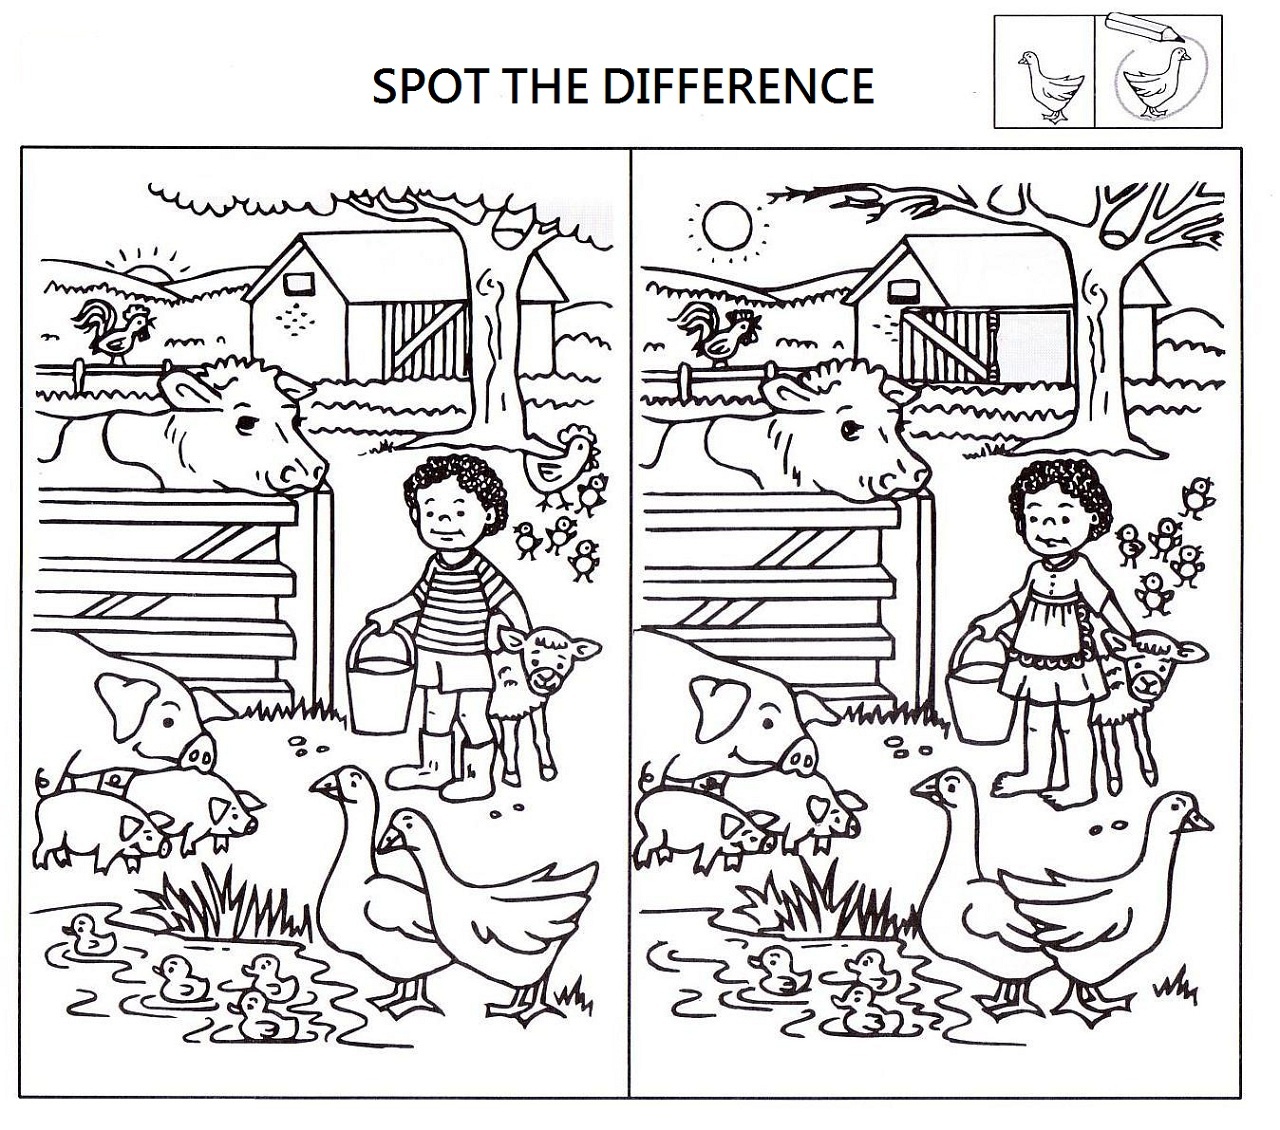 Spot The Difference Worksheets For Kids | Activity Shelter - Free Printable Spot The Difference For Kids